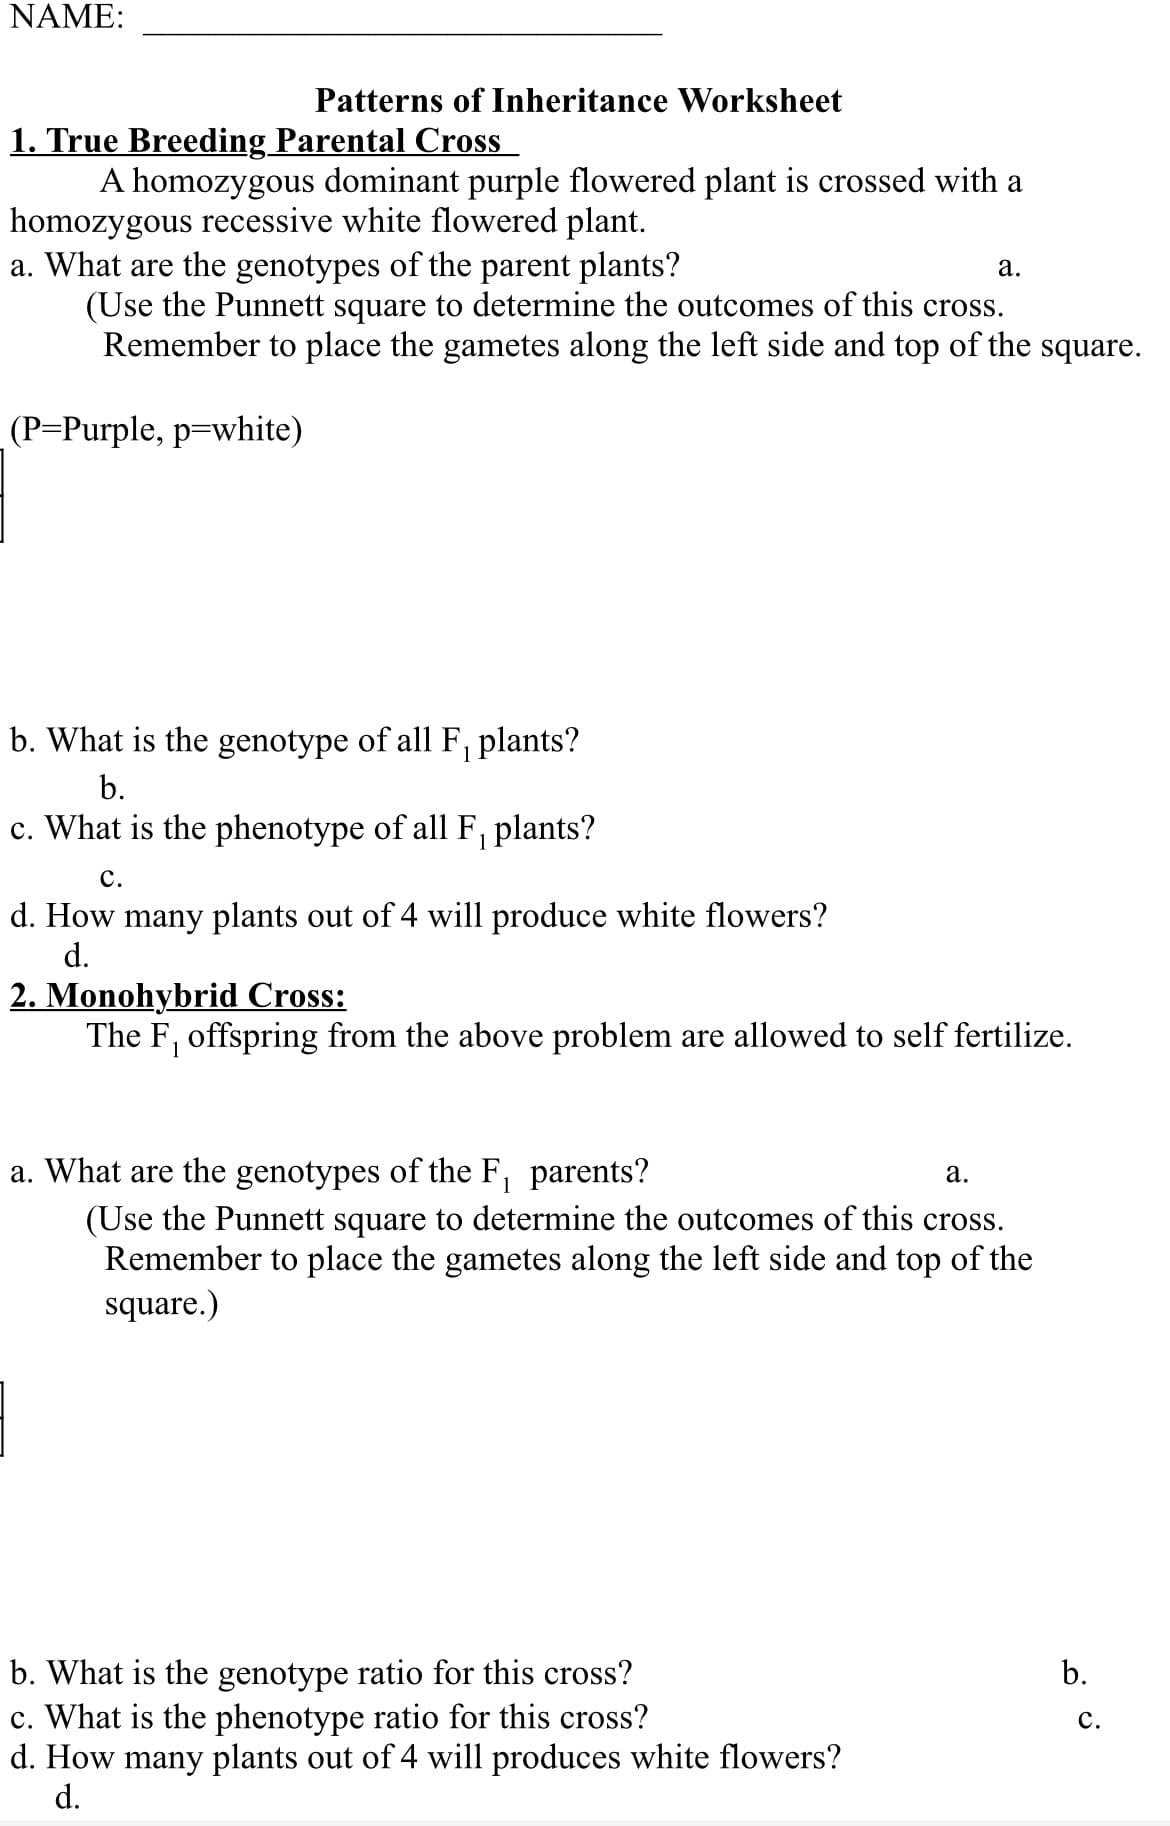 NAME:
Patterns of Inheritance Worksheet
1. True Breeding Parental Cross
A homozygous dominant purple flowered plant is crossed with a
homozygous recessive white flowered plant.
a. What are the genotypes of the parent plants?
(Use the Punnett square to determine the outcomes of this cross.
Remember to place the gametes along the left side and top of the square.
(P=Purple, p=white)
b. What is the genotype of all F₁ plants?
1
b.
c. What is the phenotype of all F₁ plants?
C.
d. How many plants out of 4 will produce white flowers?
d.
a.
2. Monohybrid Cross:
The F₁ offspring from the above problem are allowed to self fertilize.
a. What are the genotypes of the F₁ parents?
a.
(Use the Punnett square to determine the outcomes of this cross.
Remember to place the gametes along the left side and top of the
square.)
b. What is the genotype ratio for this cross?
c. What is the phenotype ratio for this cross?
d. How many plants out of 4 will produces white flowers?
d.
b.
C.